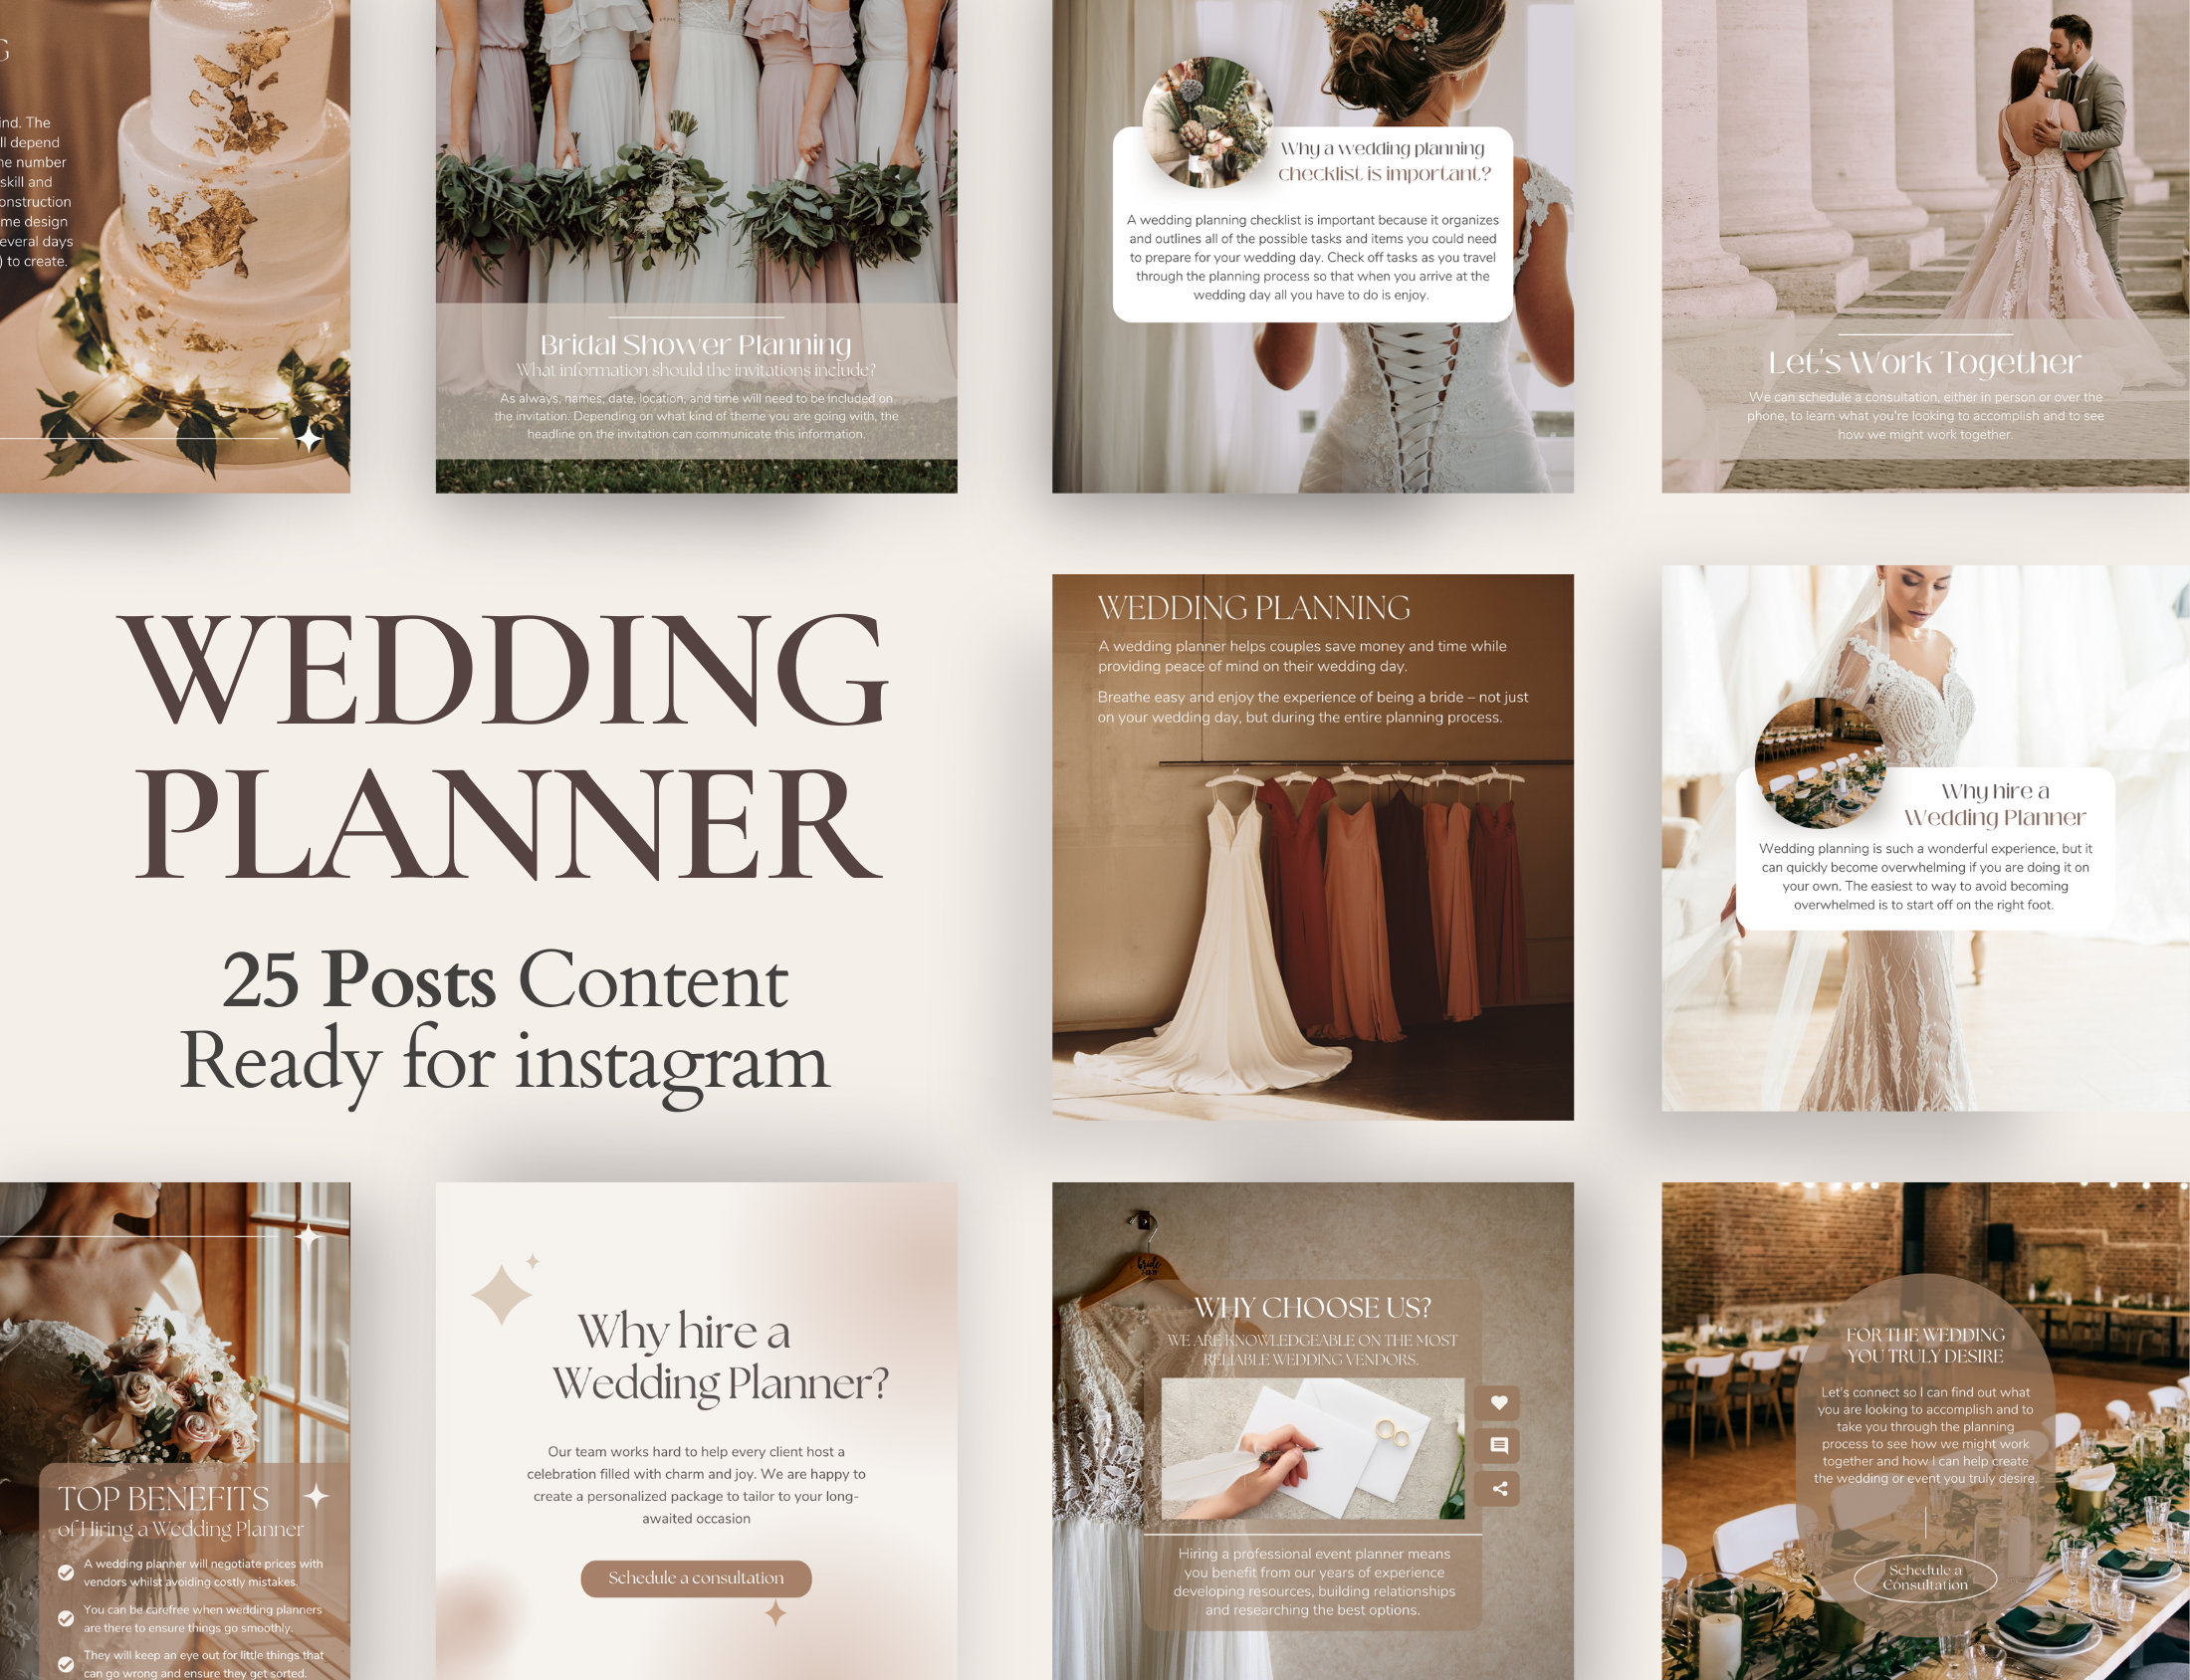 Wedding Planner vs. Designer: Which is Right for Me?